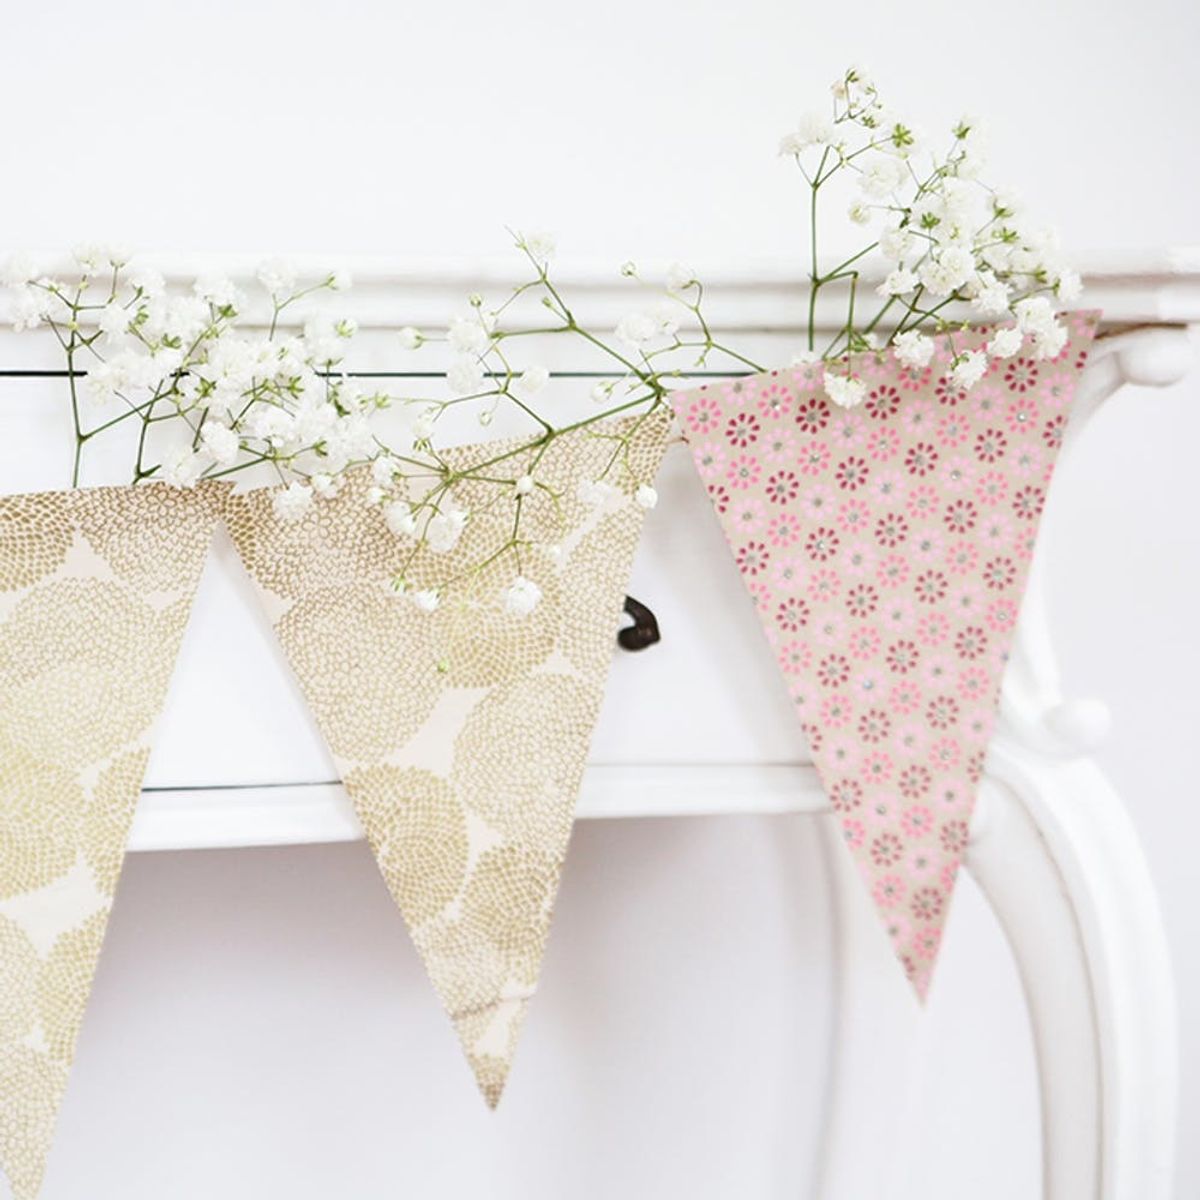 5-Minute DIY: How to Make the Prettiest Party Garland Ever